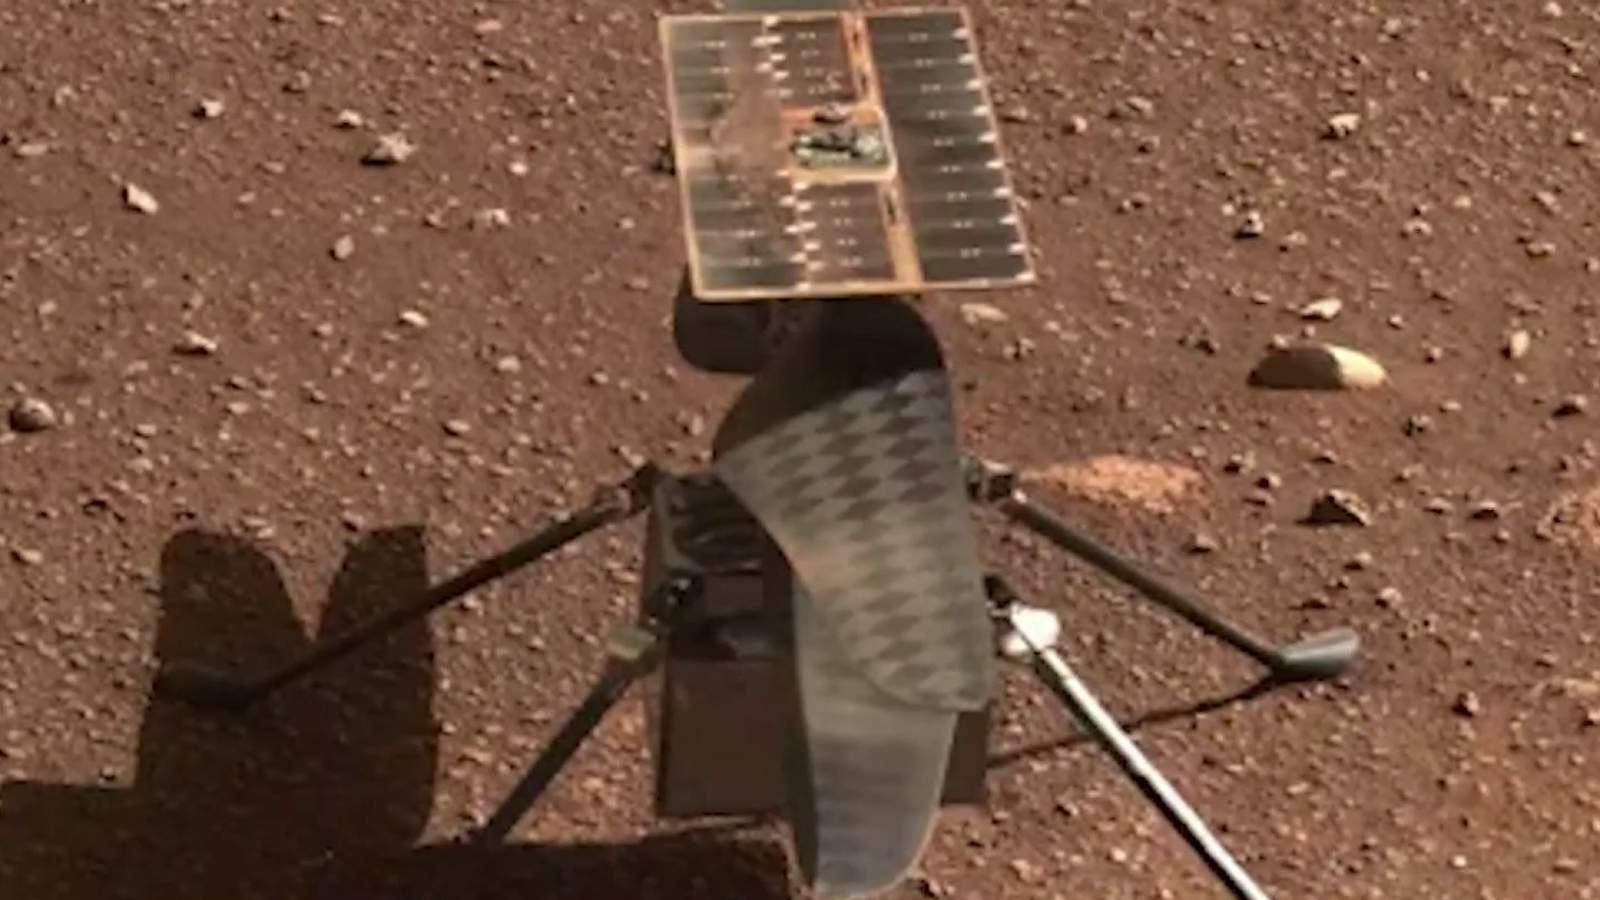 NASA’s tiny helicopter is ready to fly on Mars